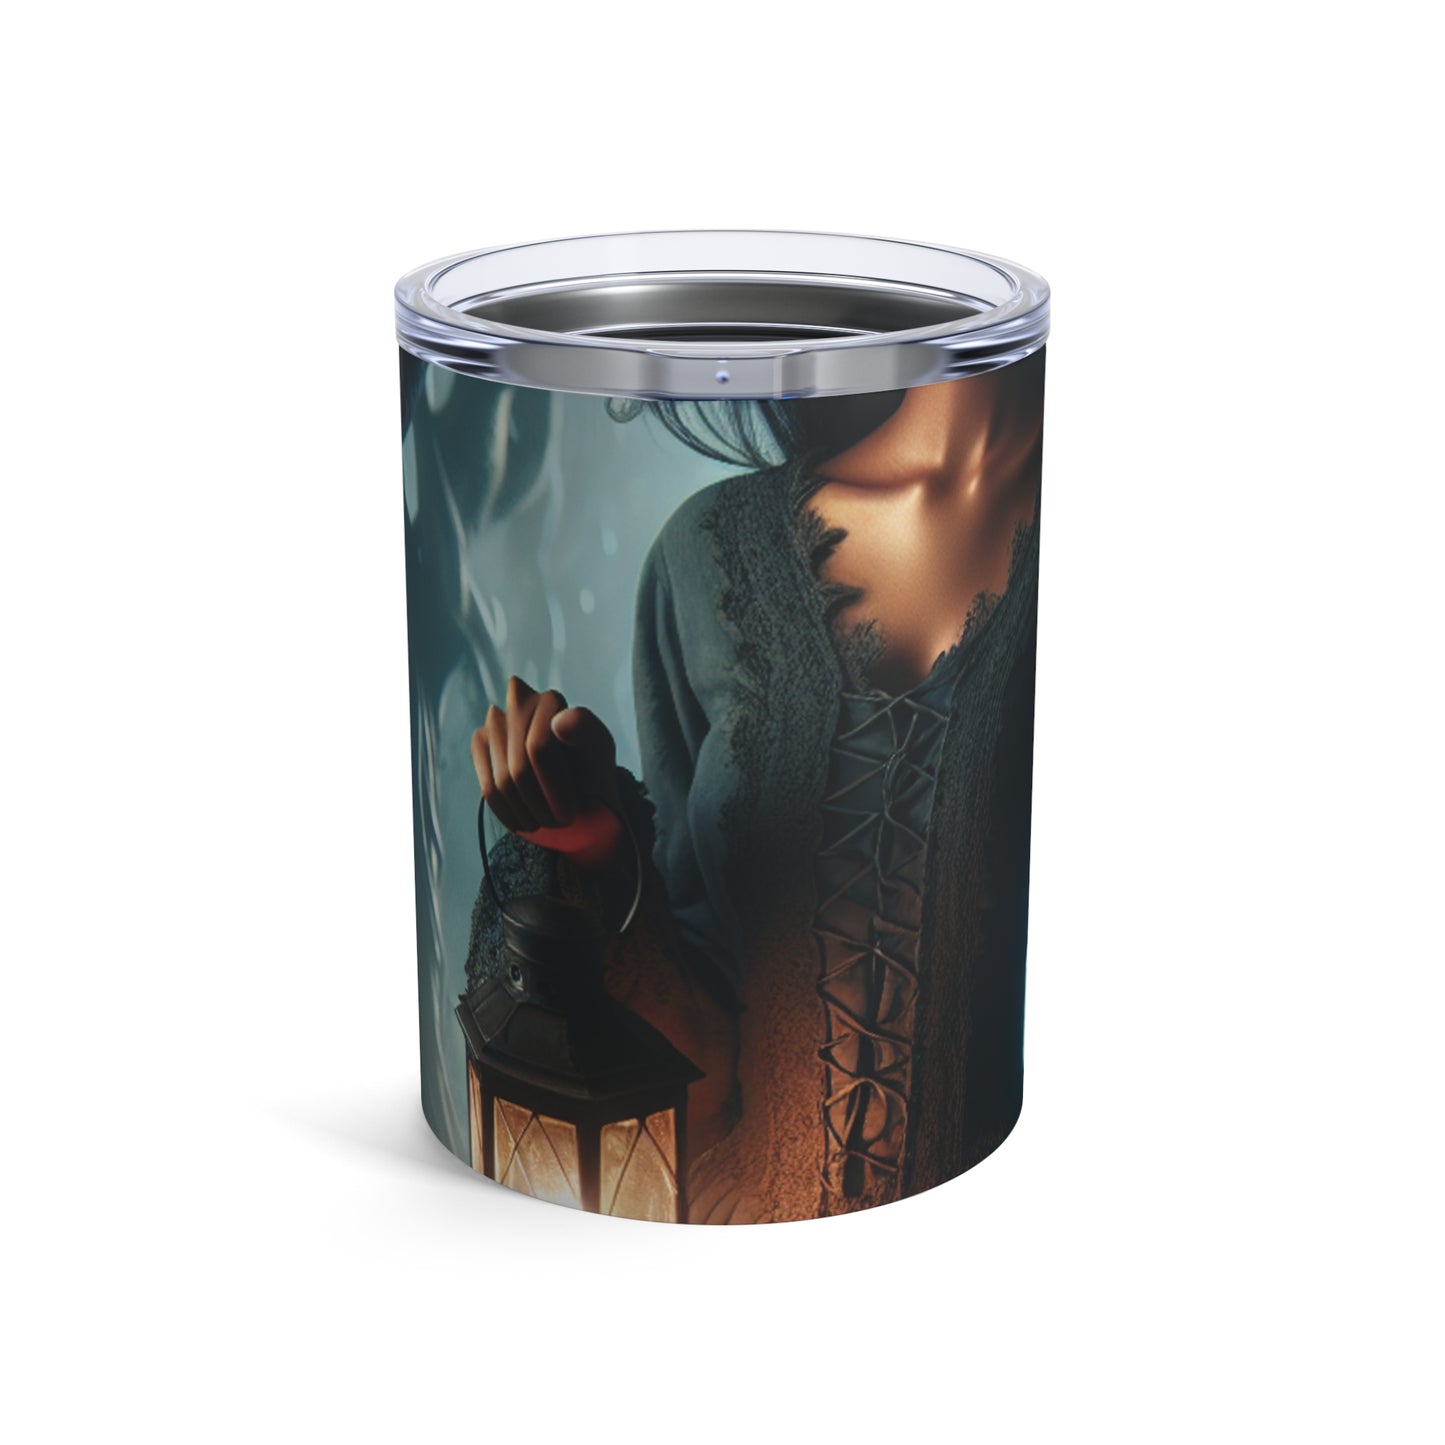 "Ready for Battle in the Twisted Woods" - The Alien Tumbler 10oz Gothic Art Style